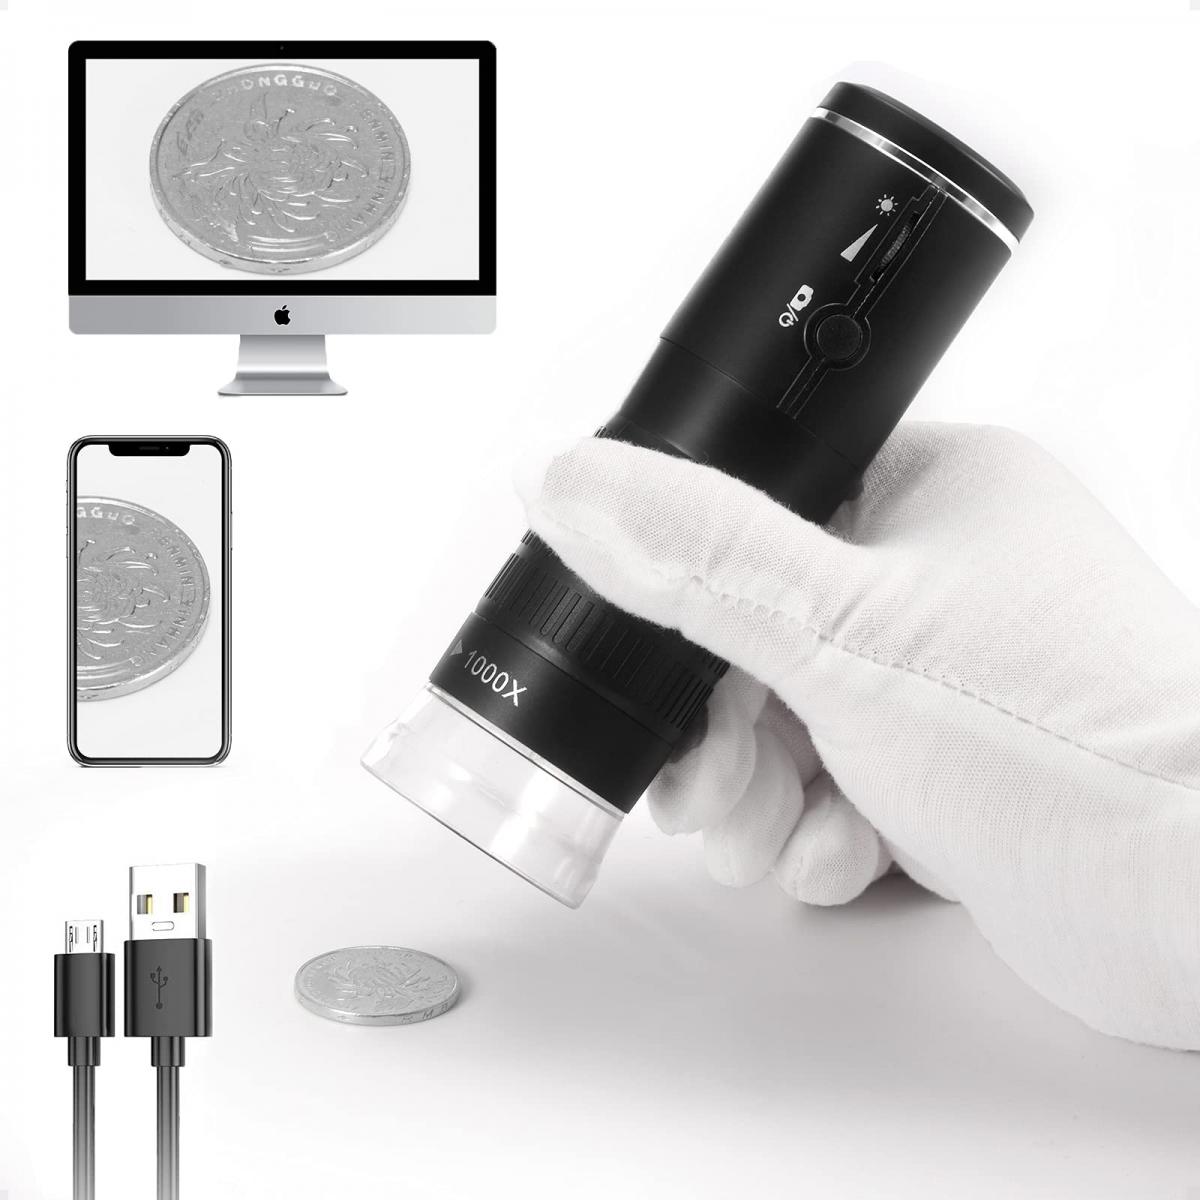 Black Wireless Digital Microscope Camera 720P Pocket Handheld USB Magnification Endoscope 50X to 1000x Compatible with iPhone Andriod Laptop with 8 LED for Natural Science Classes Gift 